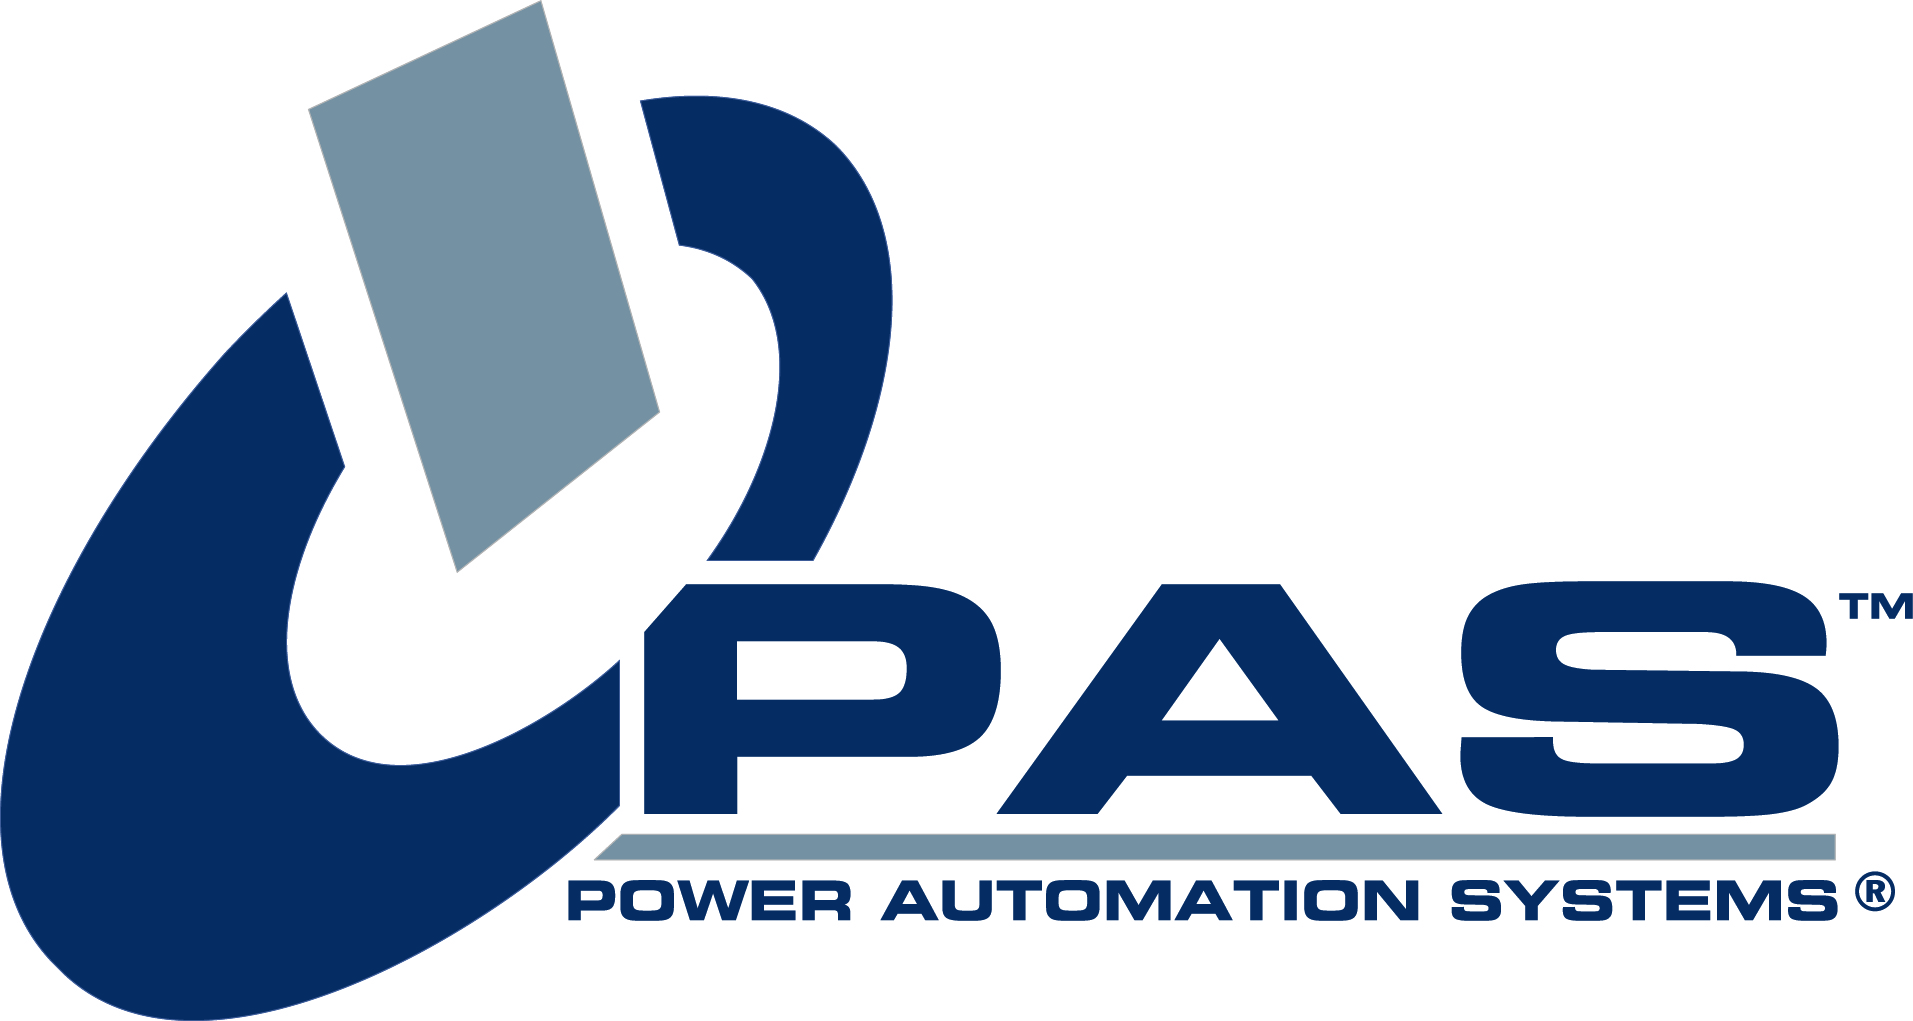 http://pressreleaseheadlines.com/wp-content/Cimy_User_Extra_Fields/Power Automation Systems/PAS_logo.jpg